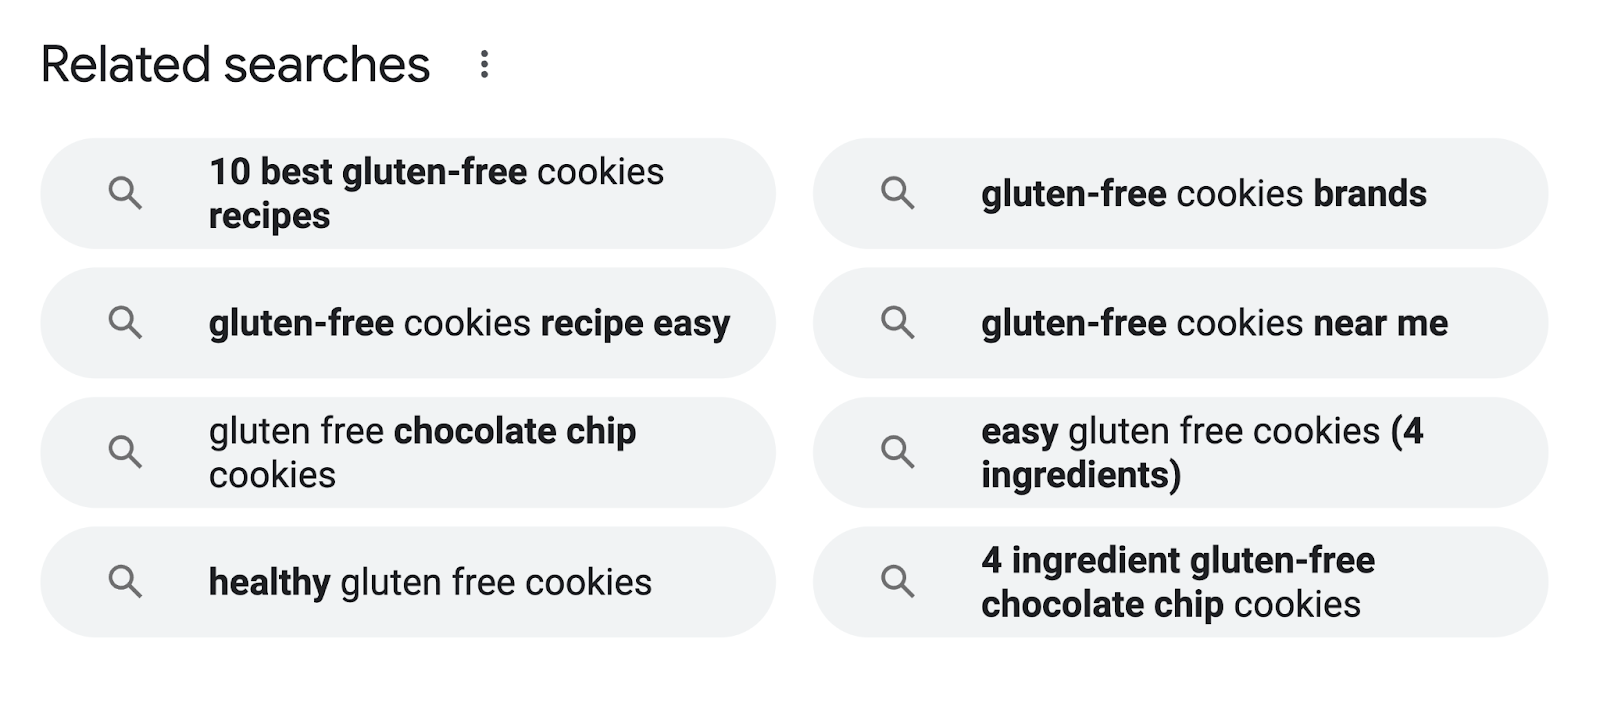 Google’s “Related searches” conception  for "gluten escaped  cookies"